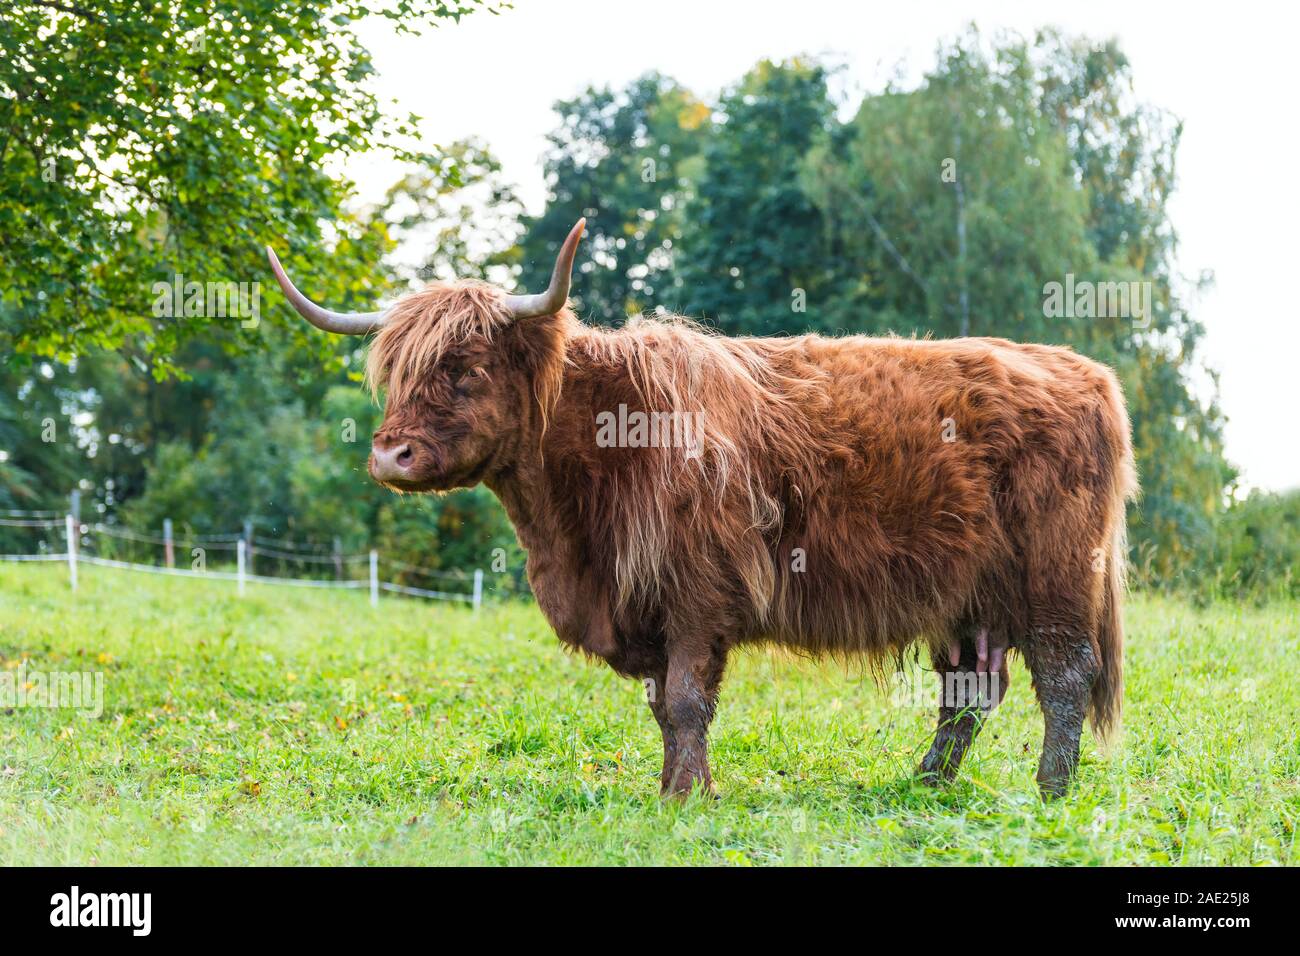 Ginger Highland livestock cow profile. Green grassy grazing. Bos taurus detail. One beef cattle with horns, brown woolly fur and udder. Rural pasture. Stock Photo